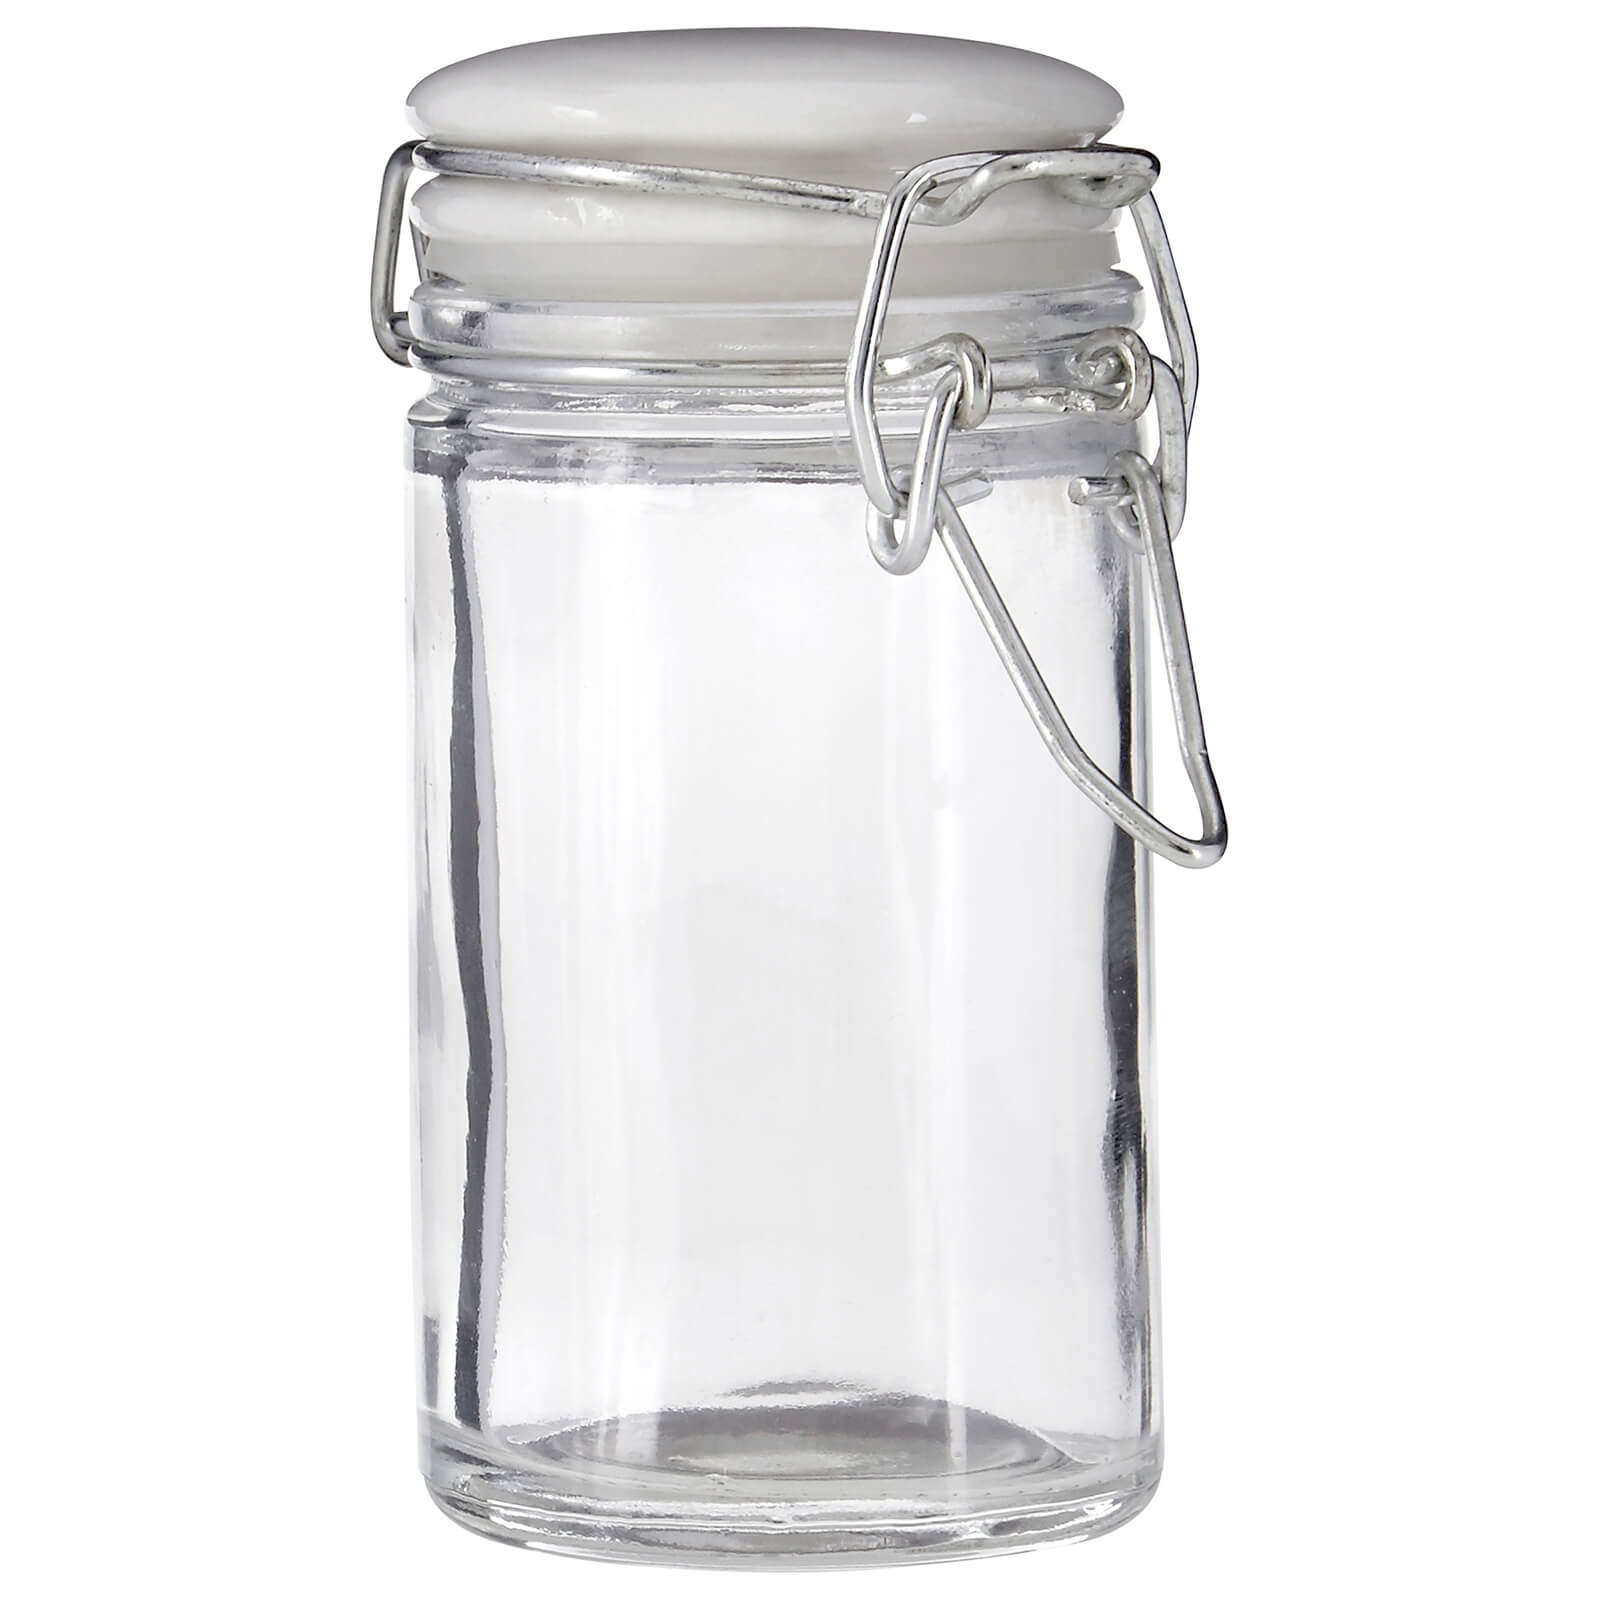 Country Cottage Glass Spice Jars- Set of 6